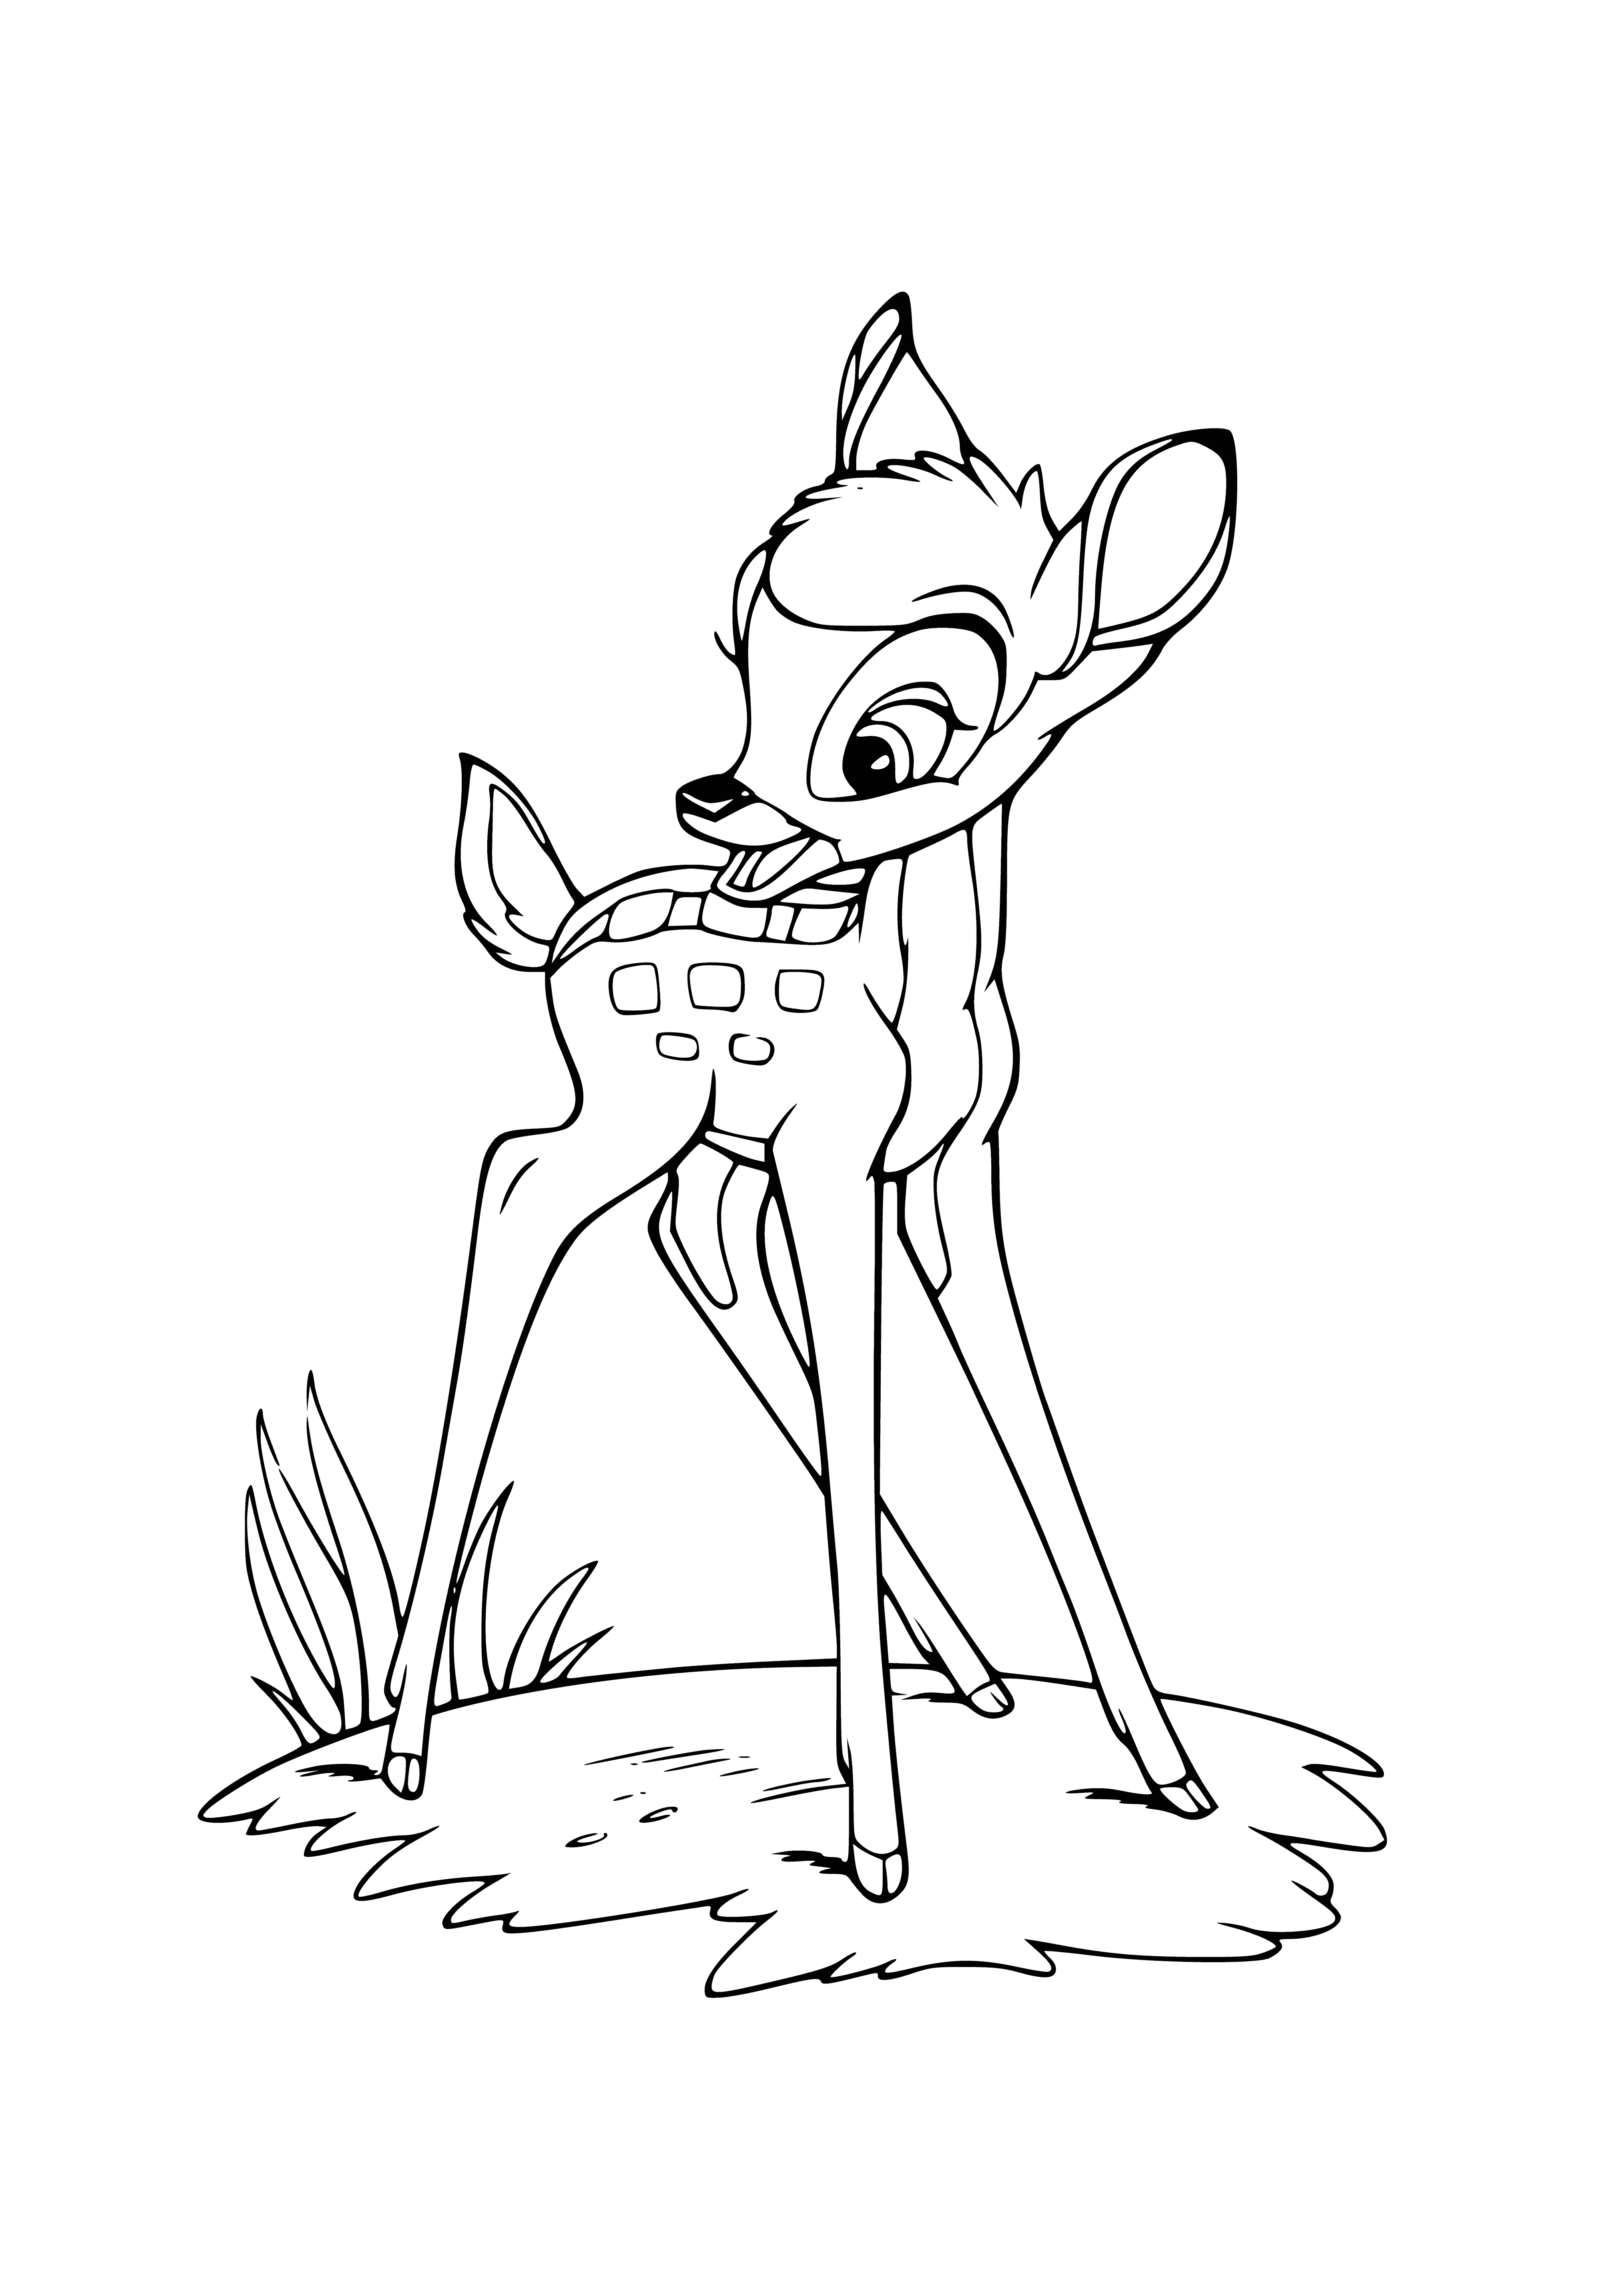 coloring page: Deer lies on the ground, wounded & bloated, with brown fur and closed eyes as seen in the coloring page. #ColoringPages #Deer